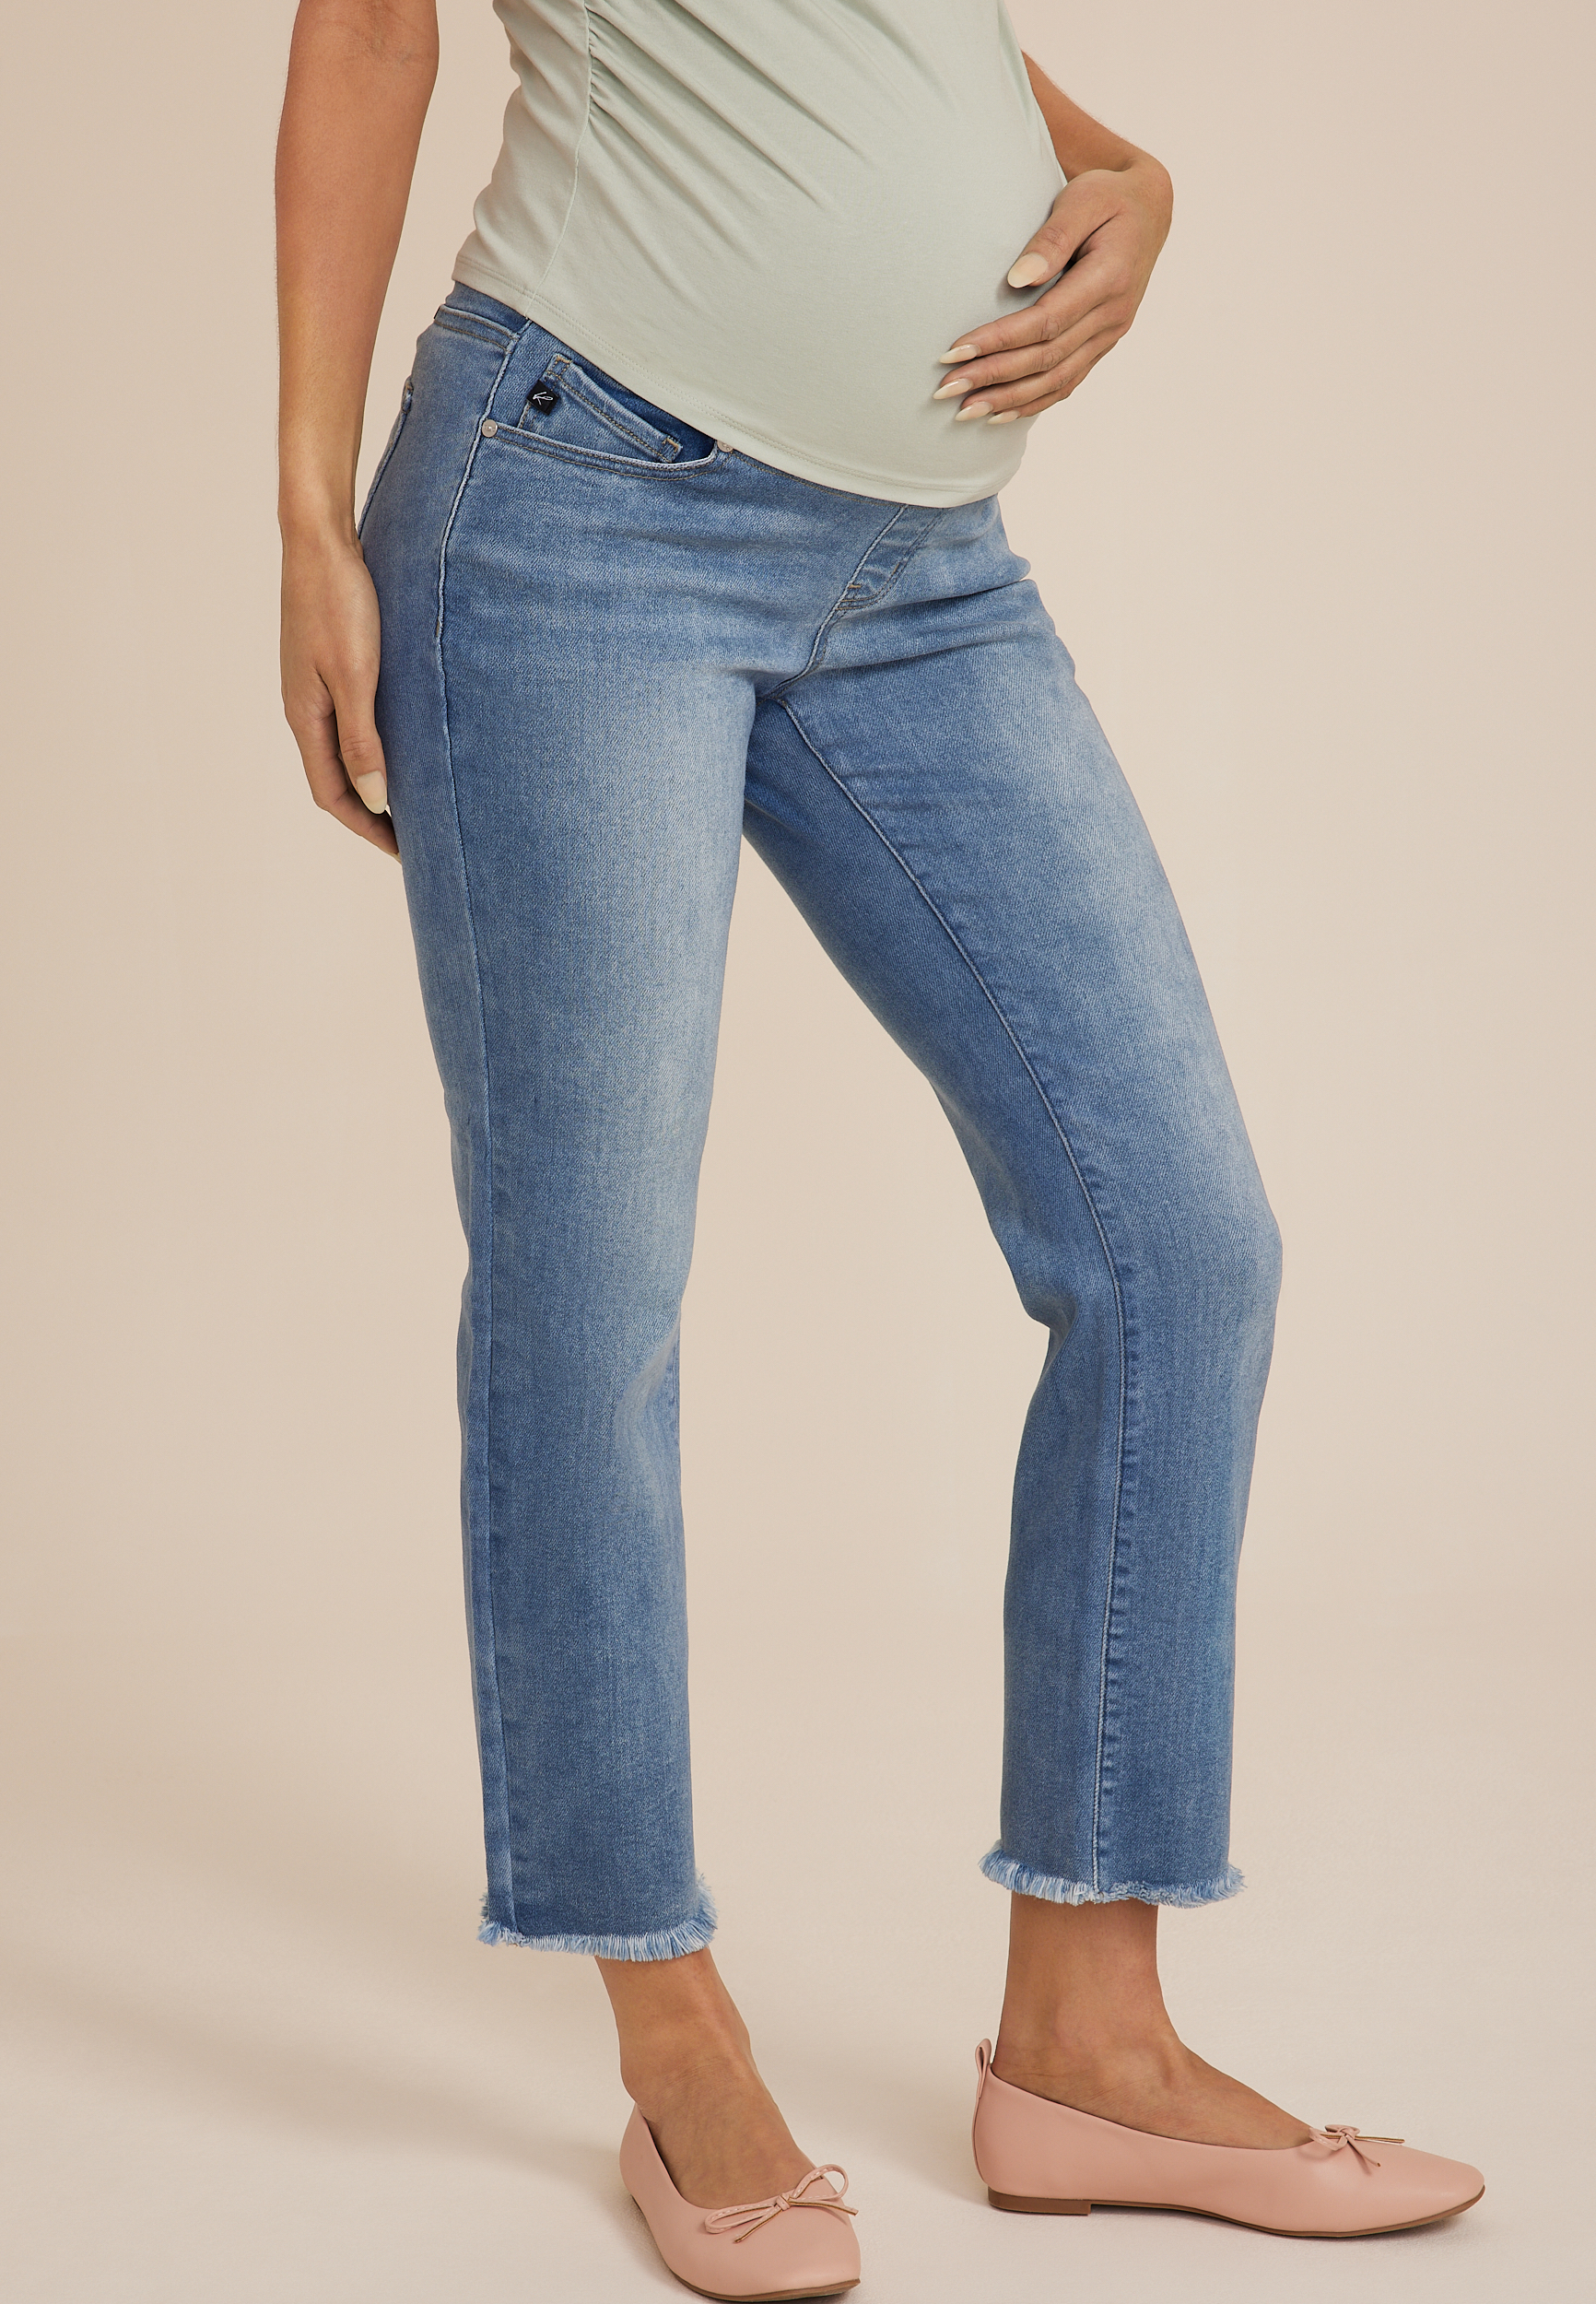 Apt. 9 ••Maternity/ Postpartum Jeans Size undefined - $11 - From Emily